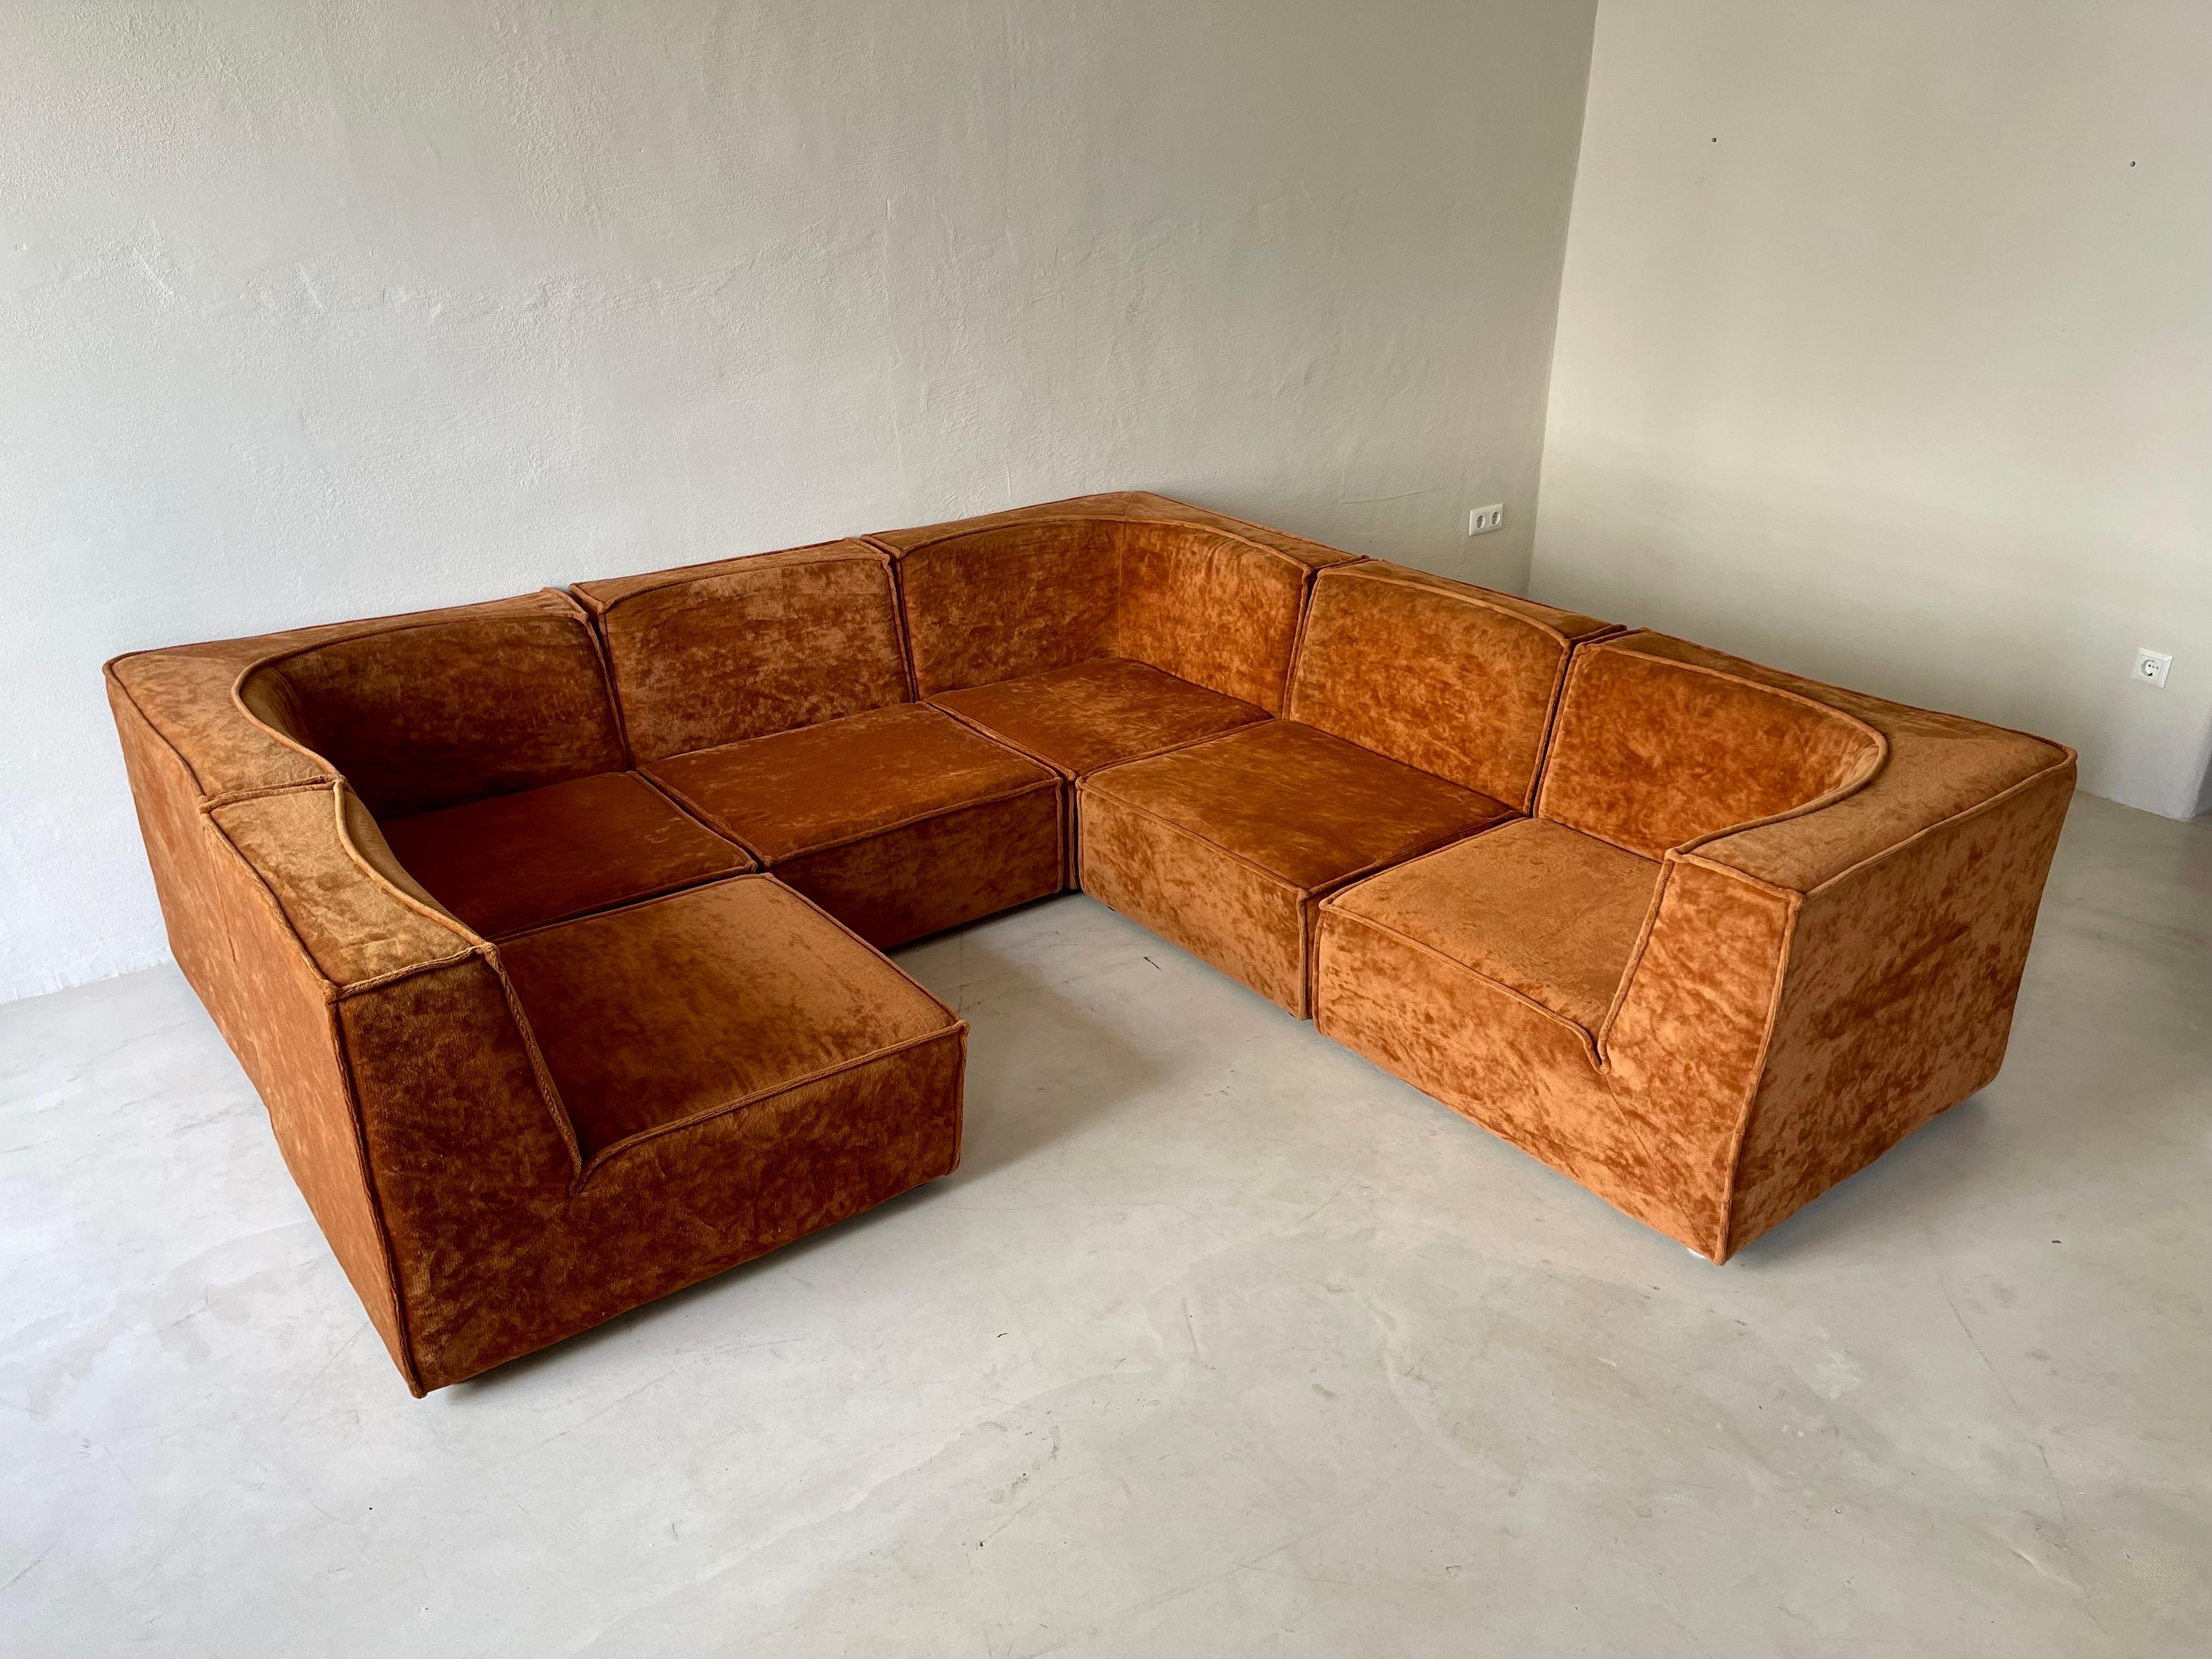 Late 20th Century Modular Sofa Living Room Set of Six by Rolf Benz 1970s